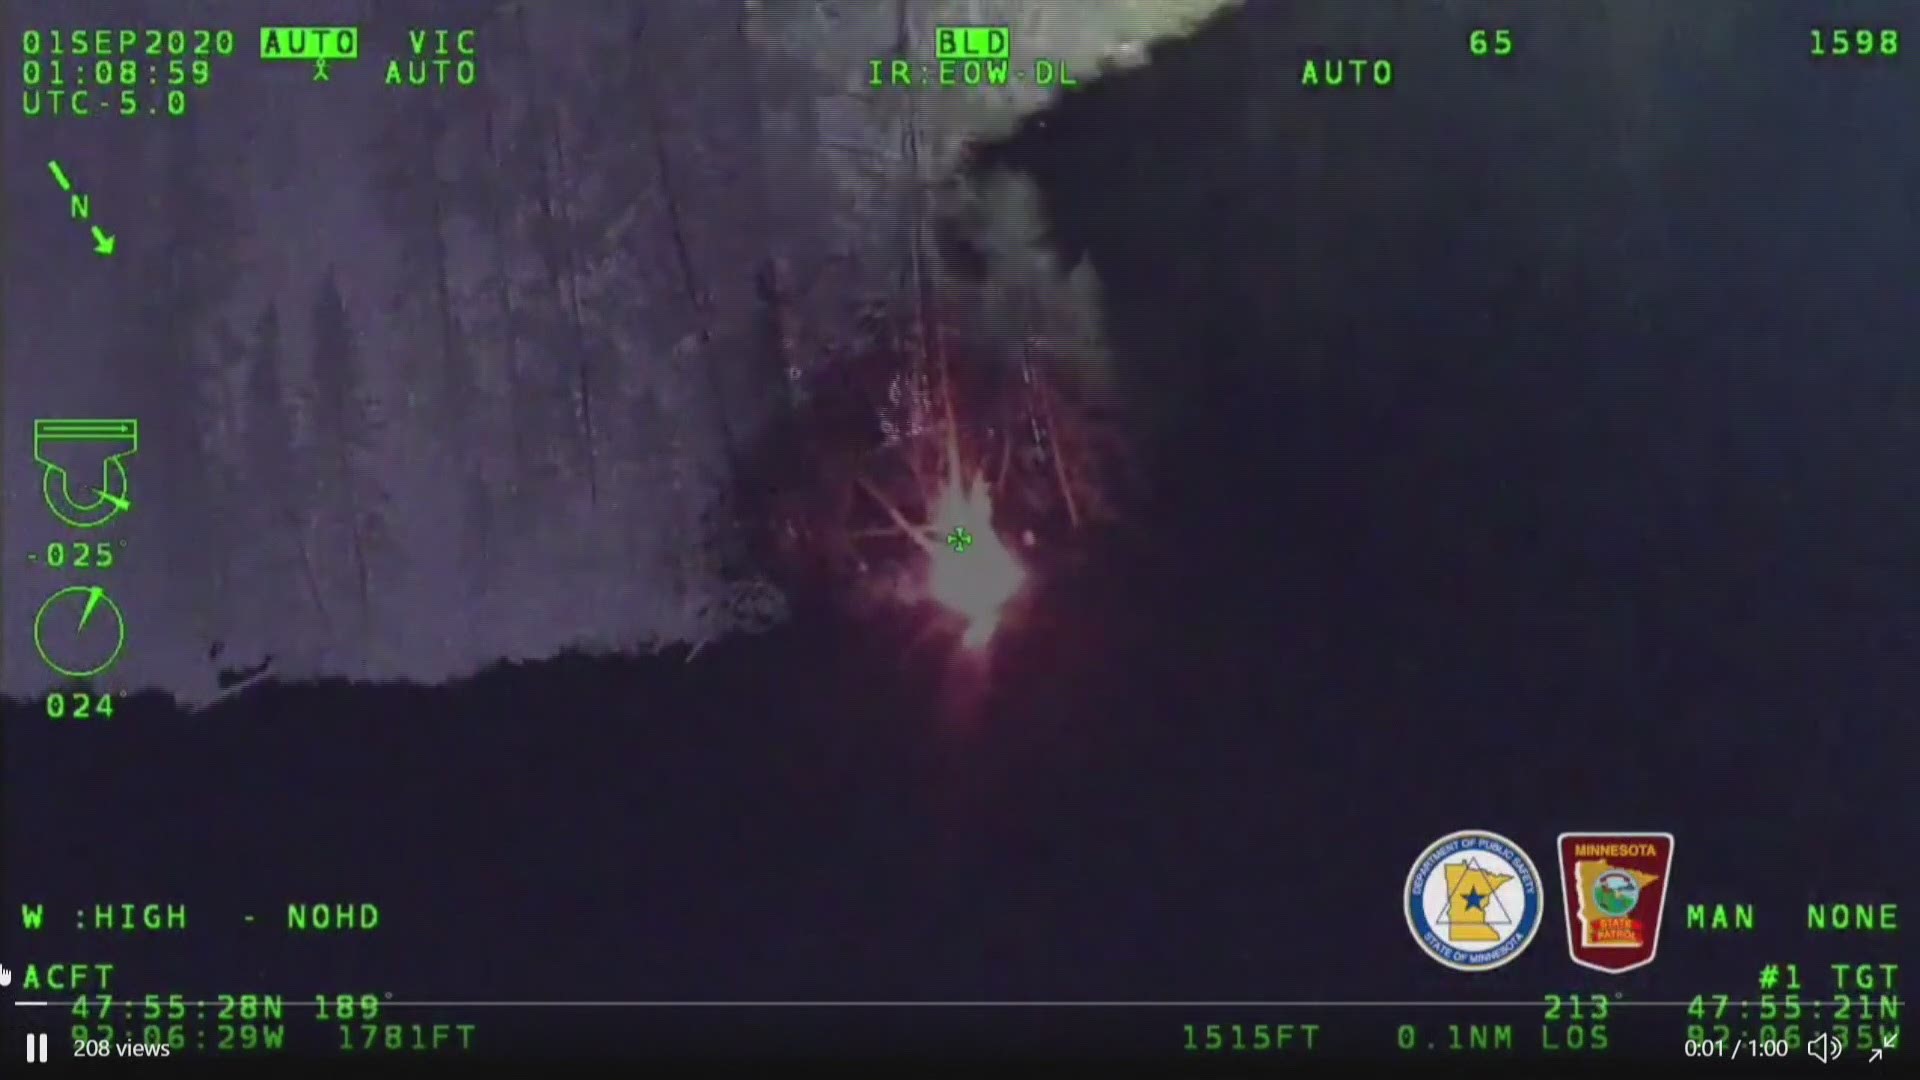 According to officials, pilots were able to locate a campfire using night vision technology and then relayed GPS coordinates to the ground team.